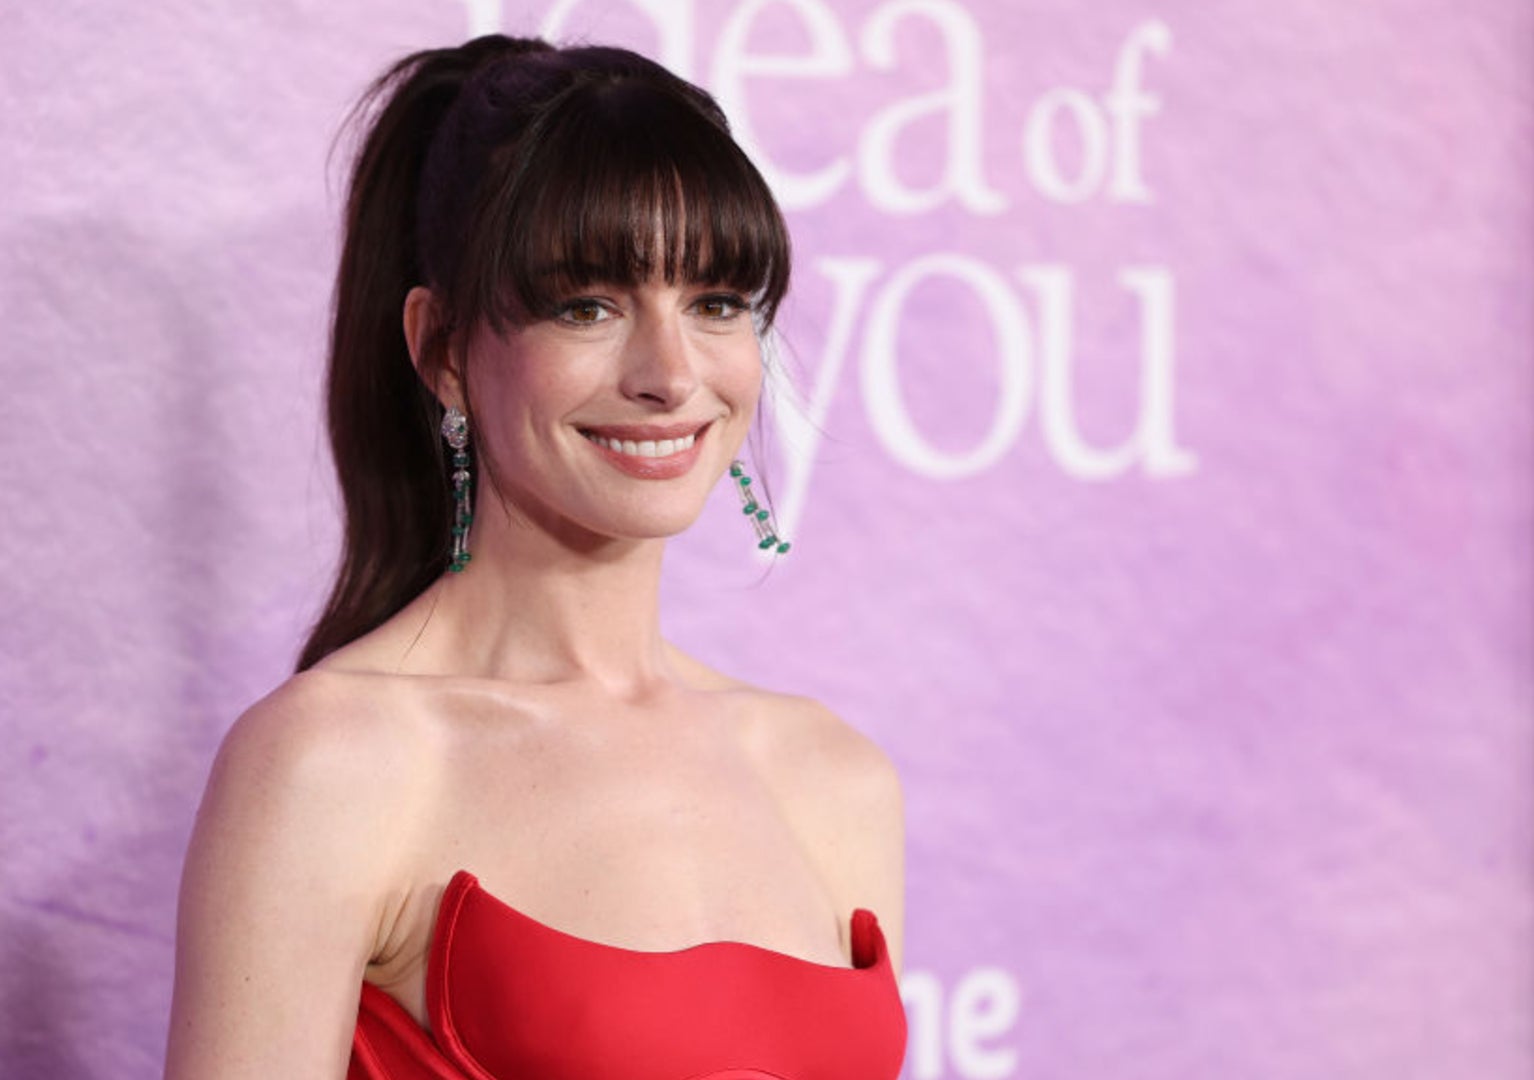 Anne Hathaway at 'The Idea of You' premiere